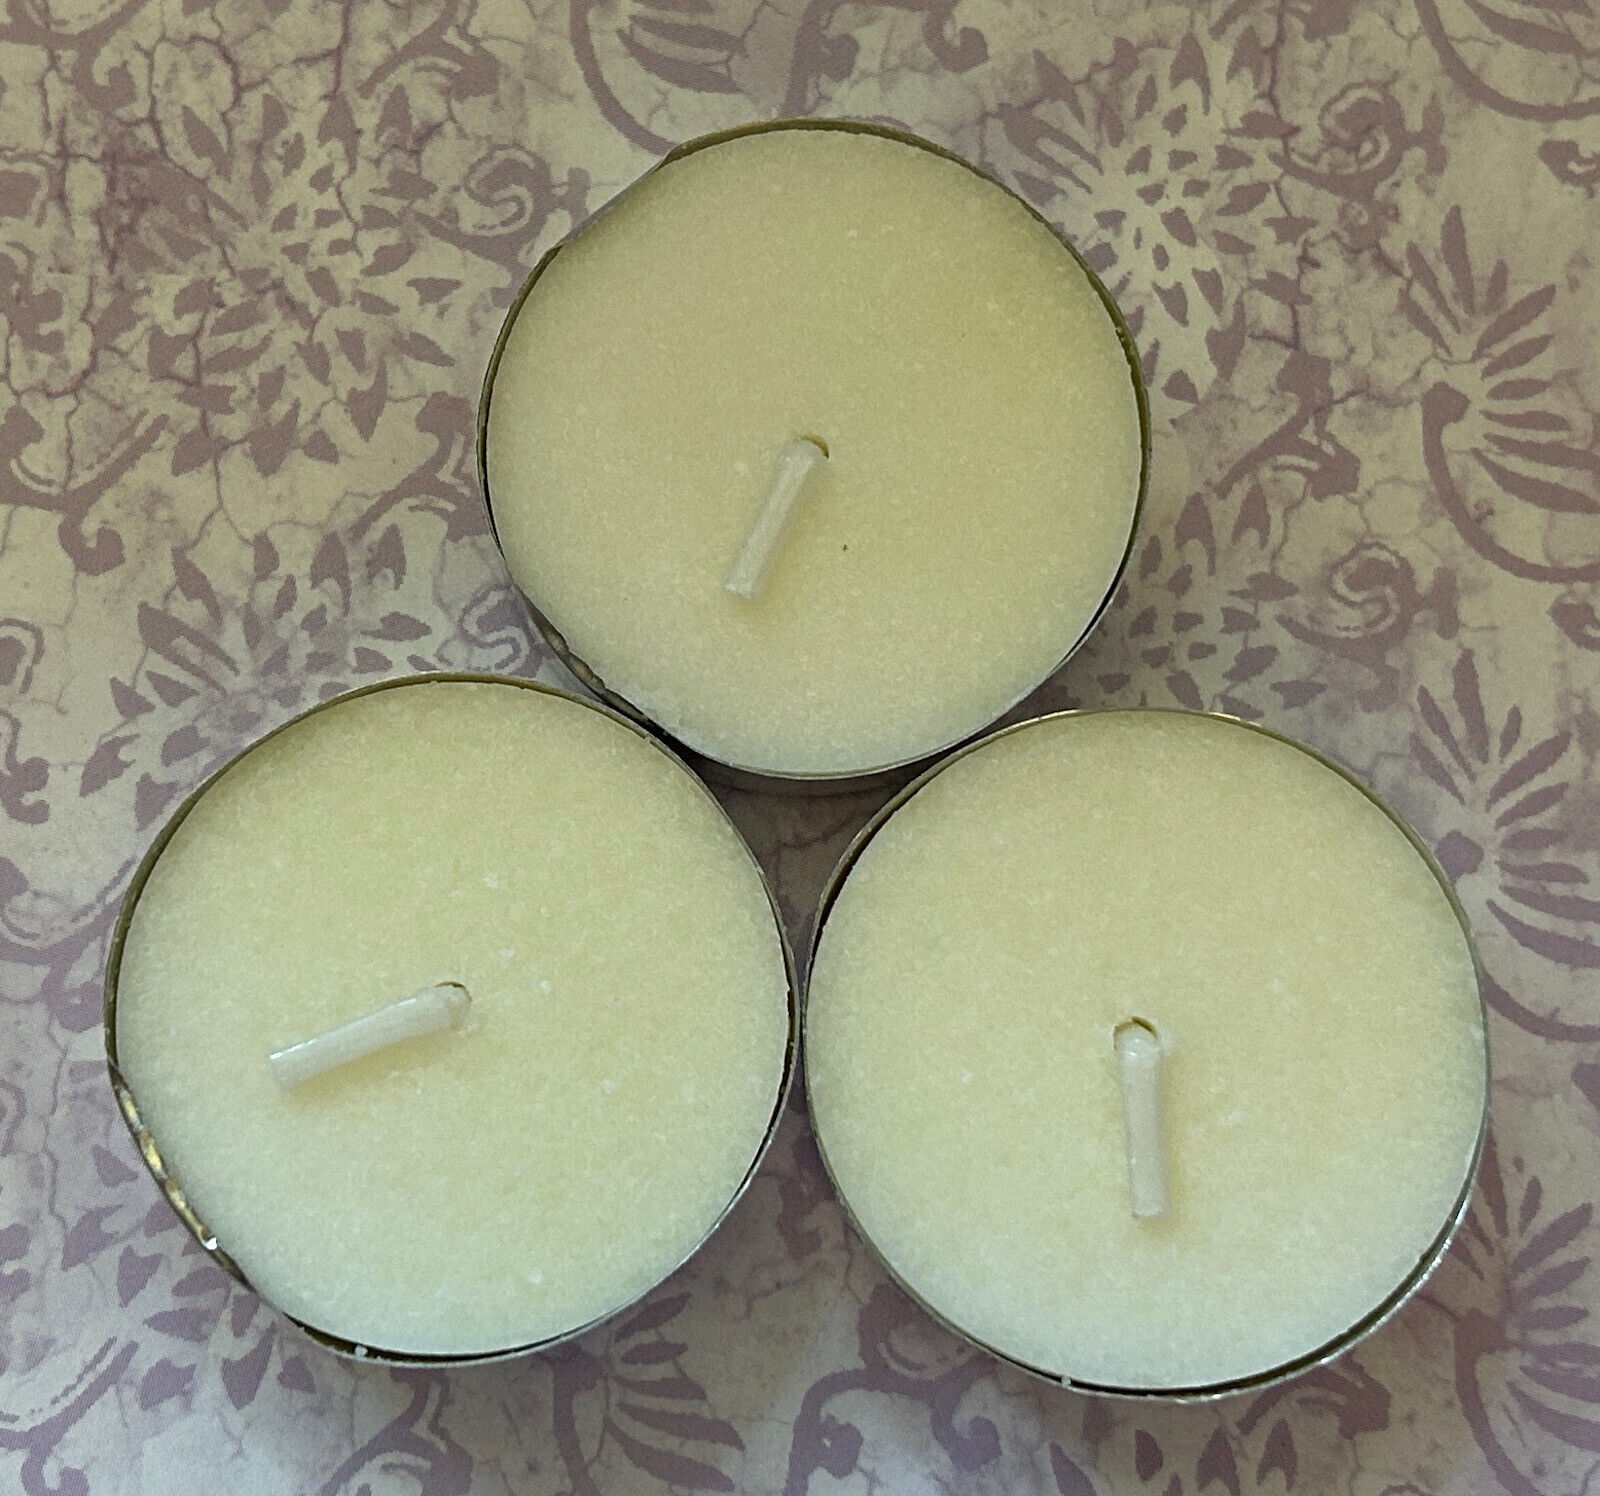 3 White Tealight Candles